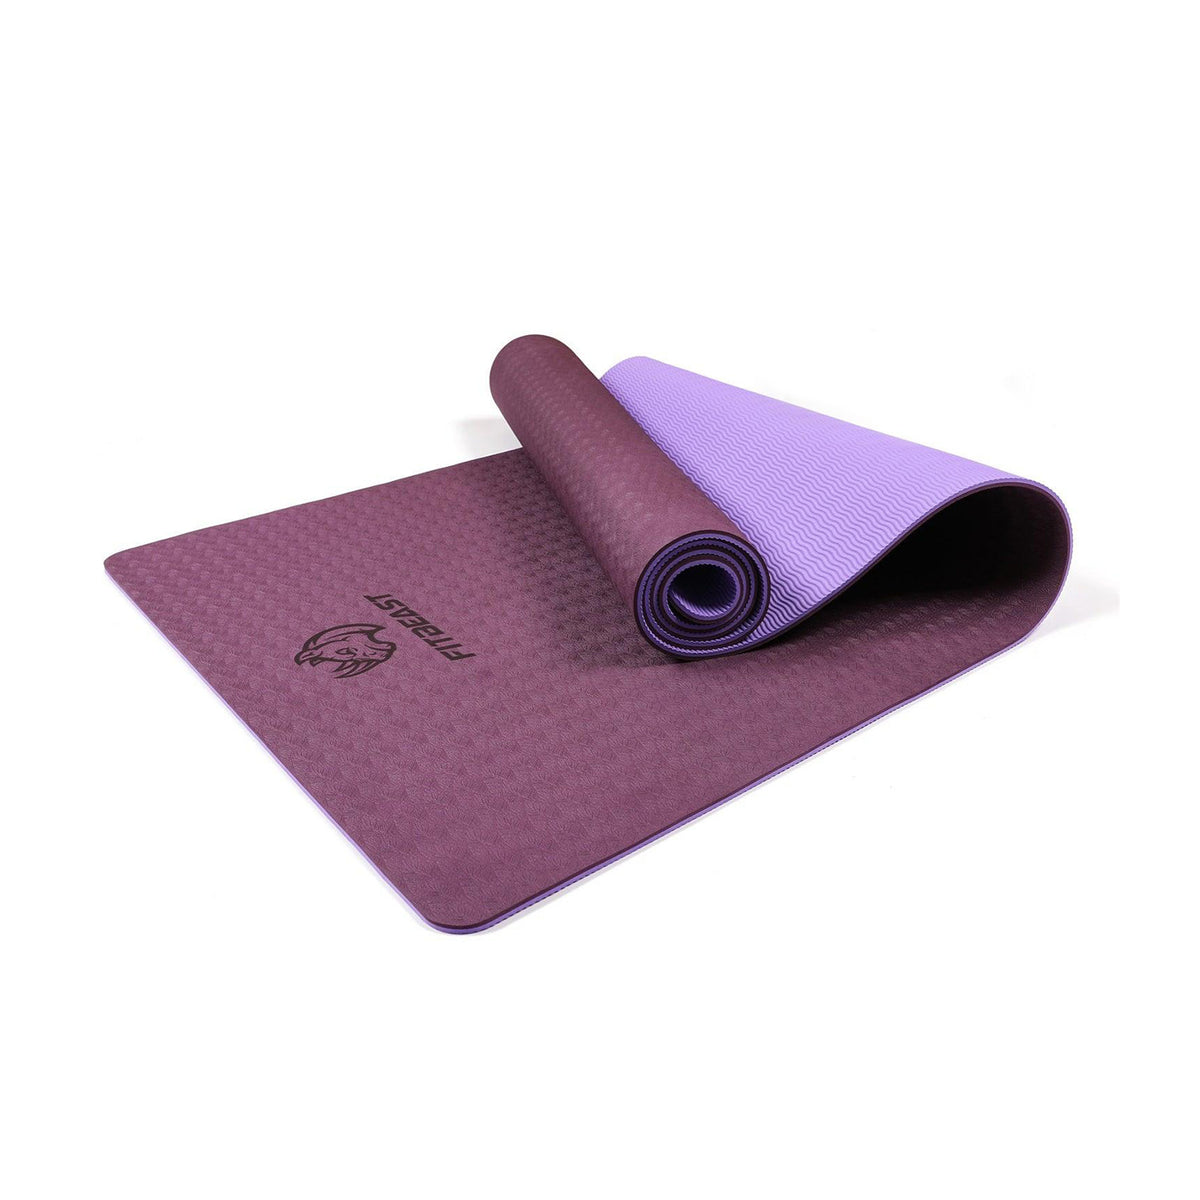 B YOGA B Mat Everyday 4mm Thick Yoga Mat, 100% Rubber, Sticky &  Eco-Friendly Exercise Mat, Non-Slip for Hot Yoga, Fitness, Pilates,  Exercise, Stretching, Gym or Home Workouts (Deep Purple, 85), Mats 